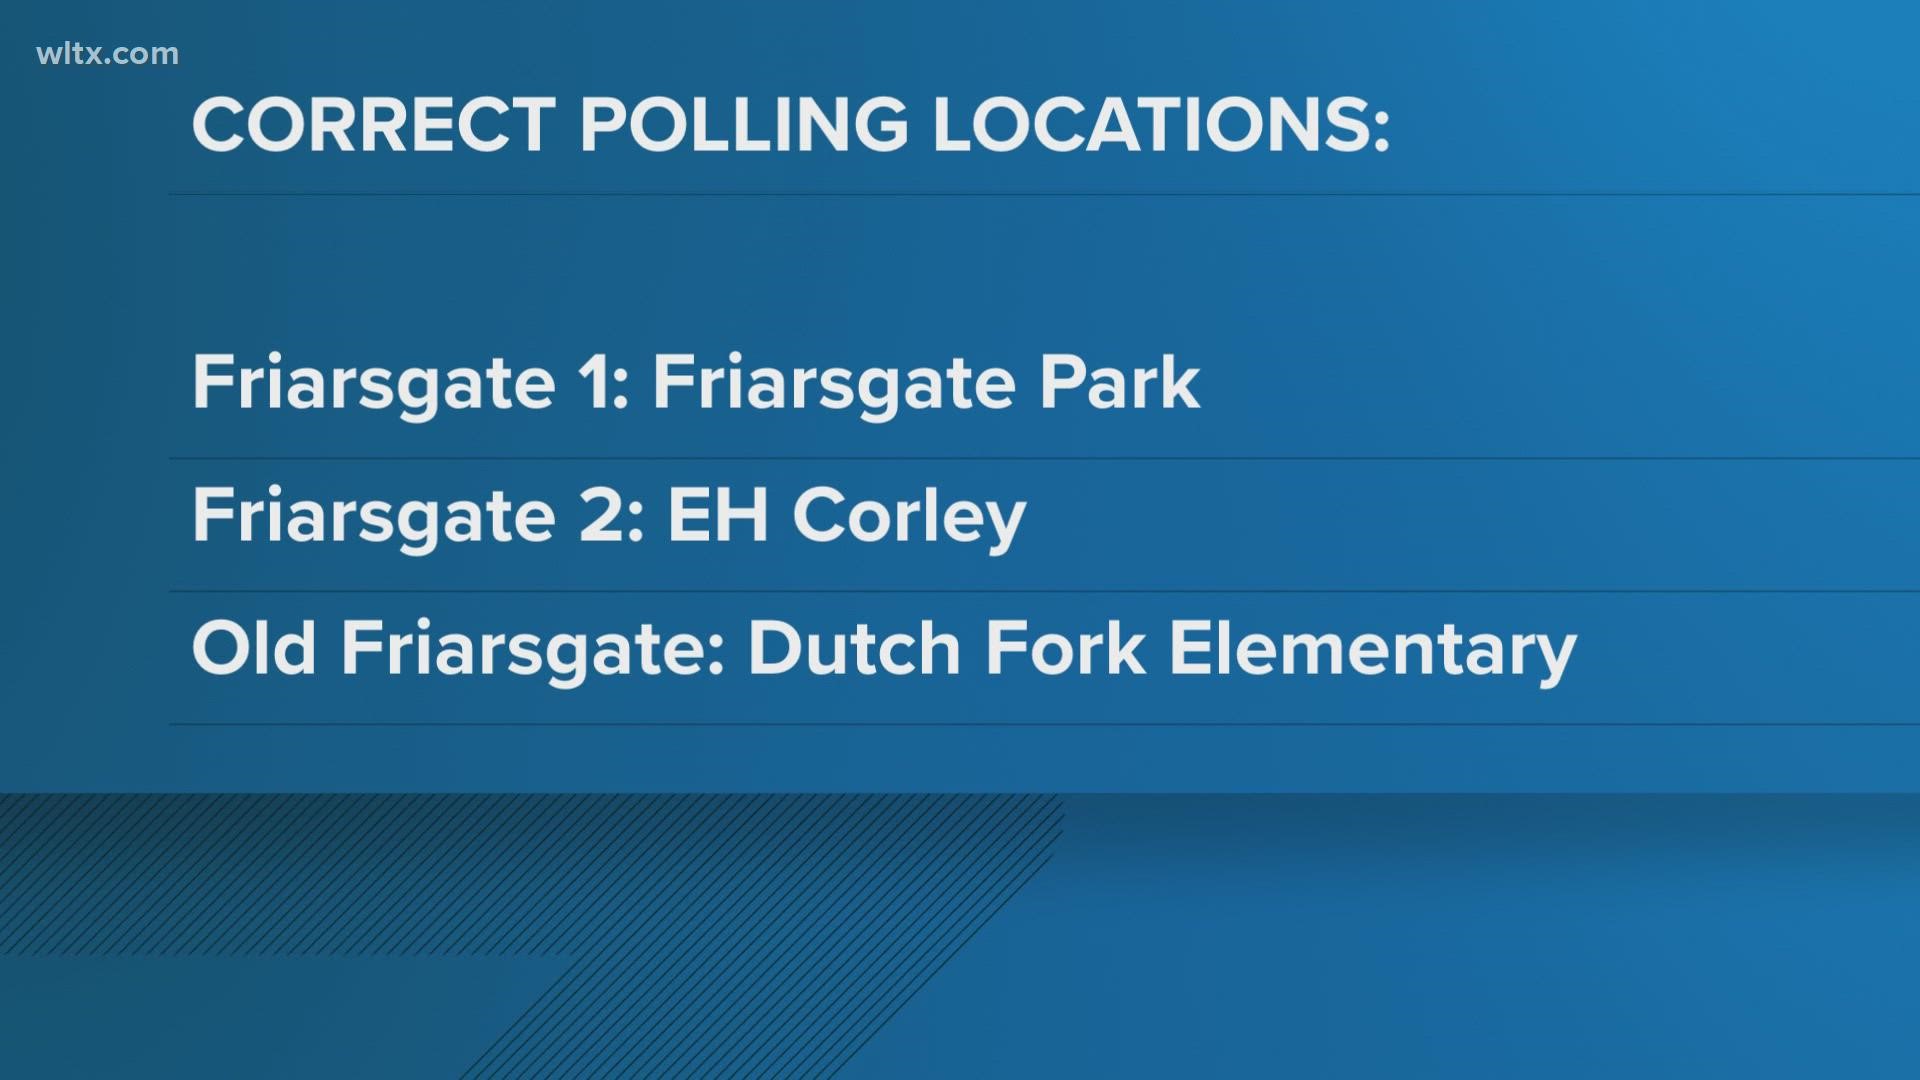 Some voters in the Friarsgate and Old Friarsgate precincts in Irmo were re-routed to different polling locations.